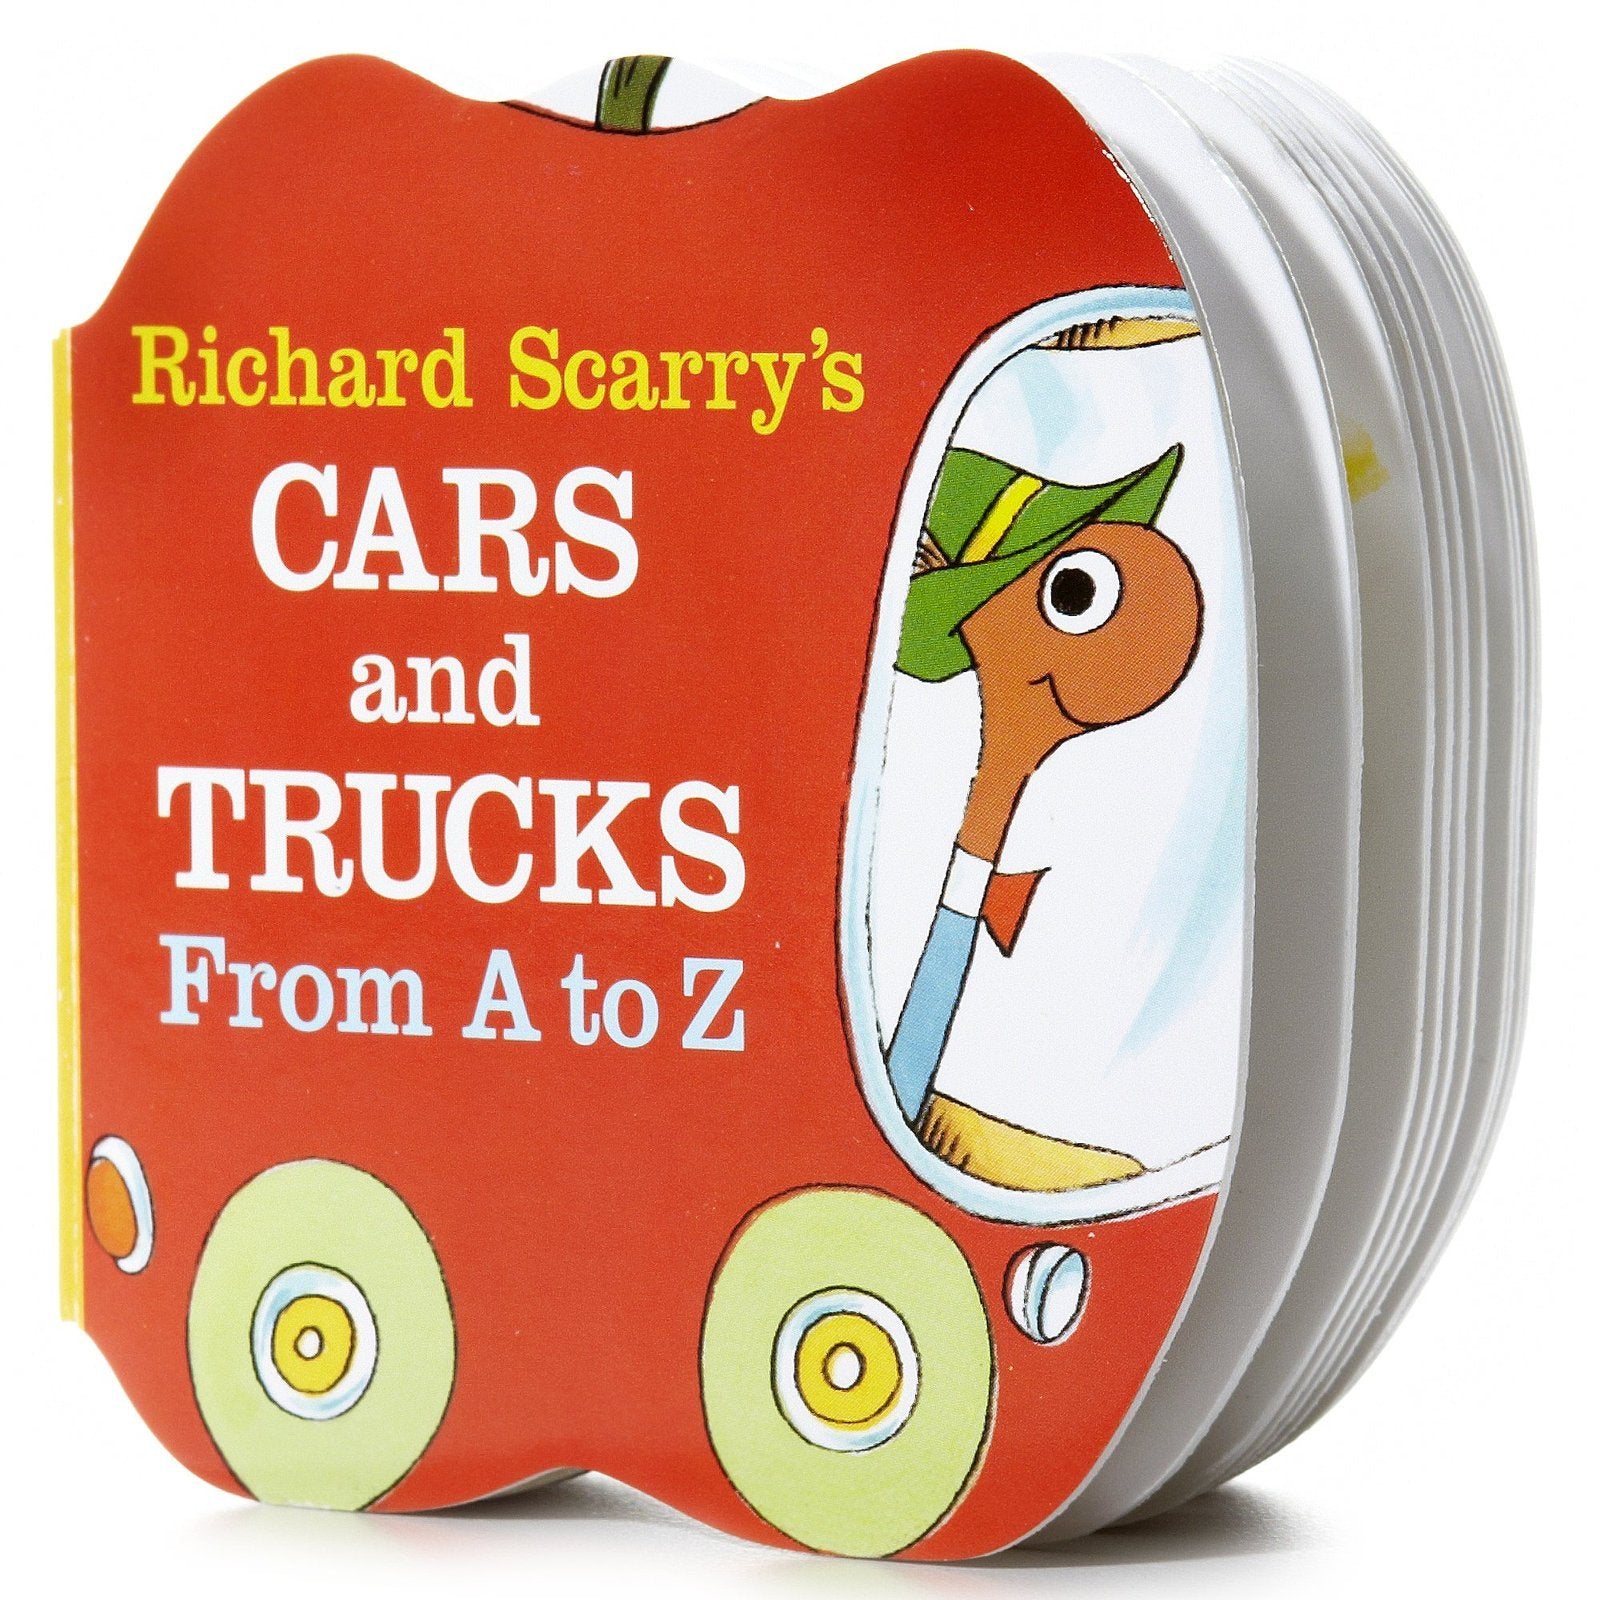 Richard Scarry's Cars and Trucks from A to Z (board book)